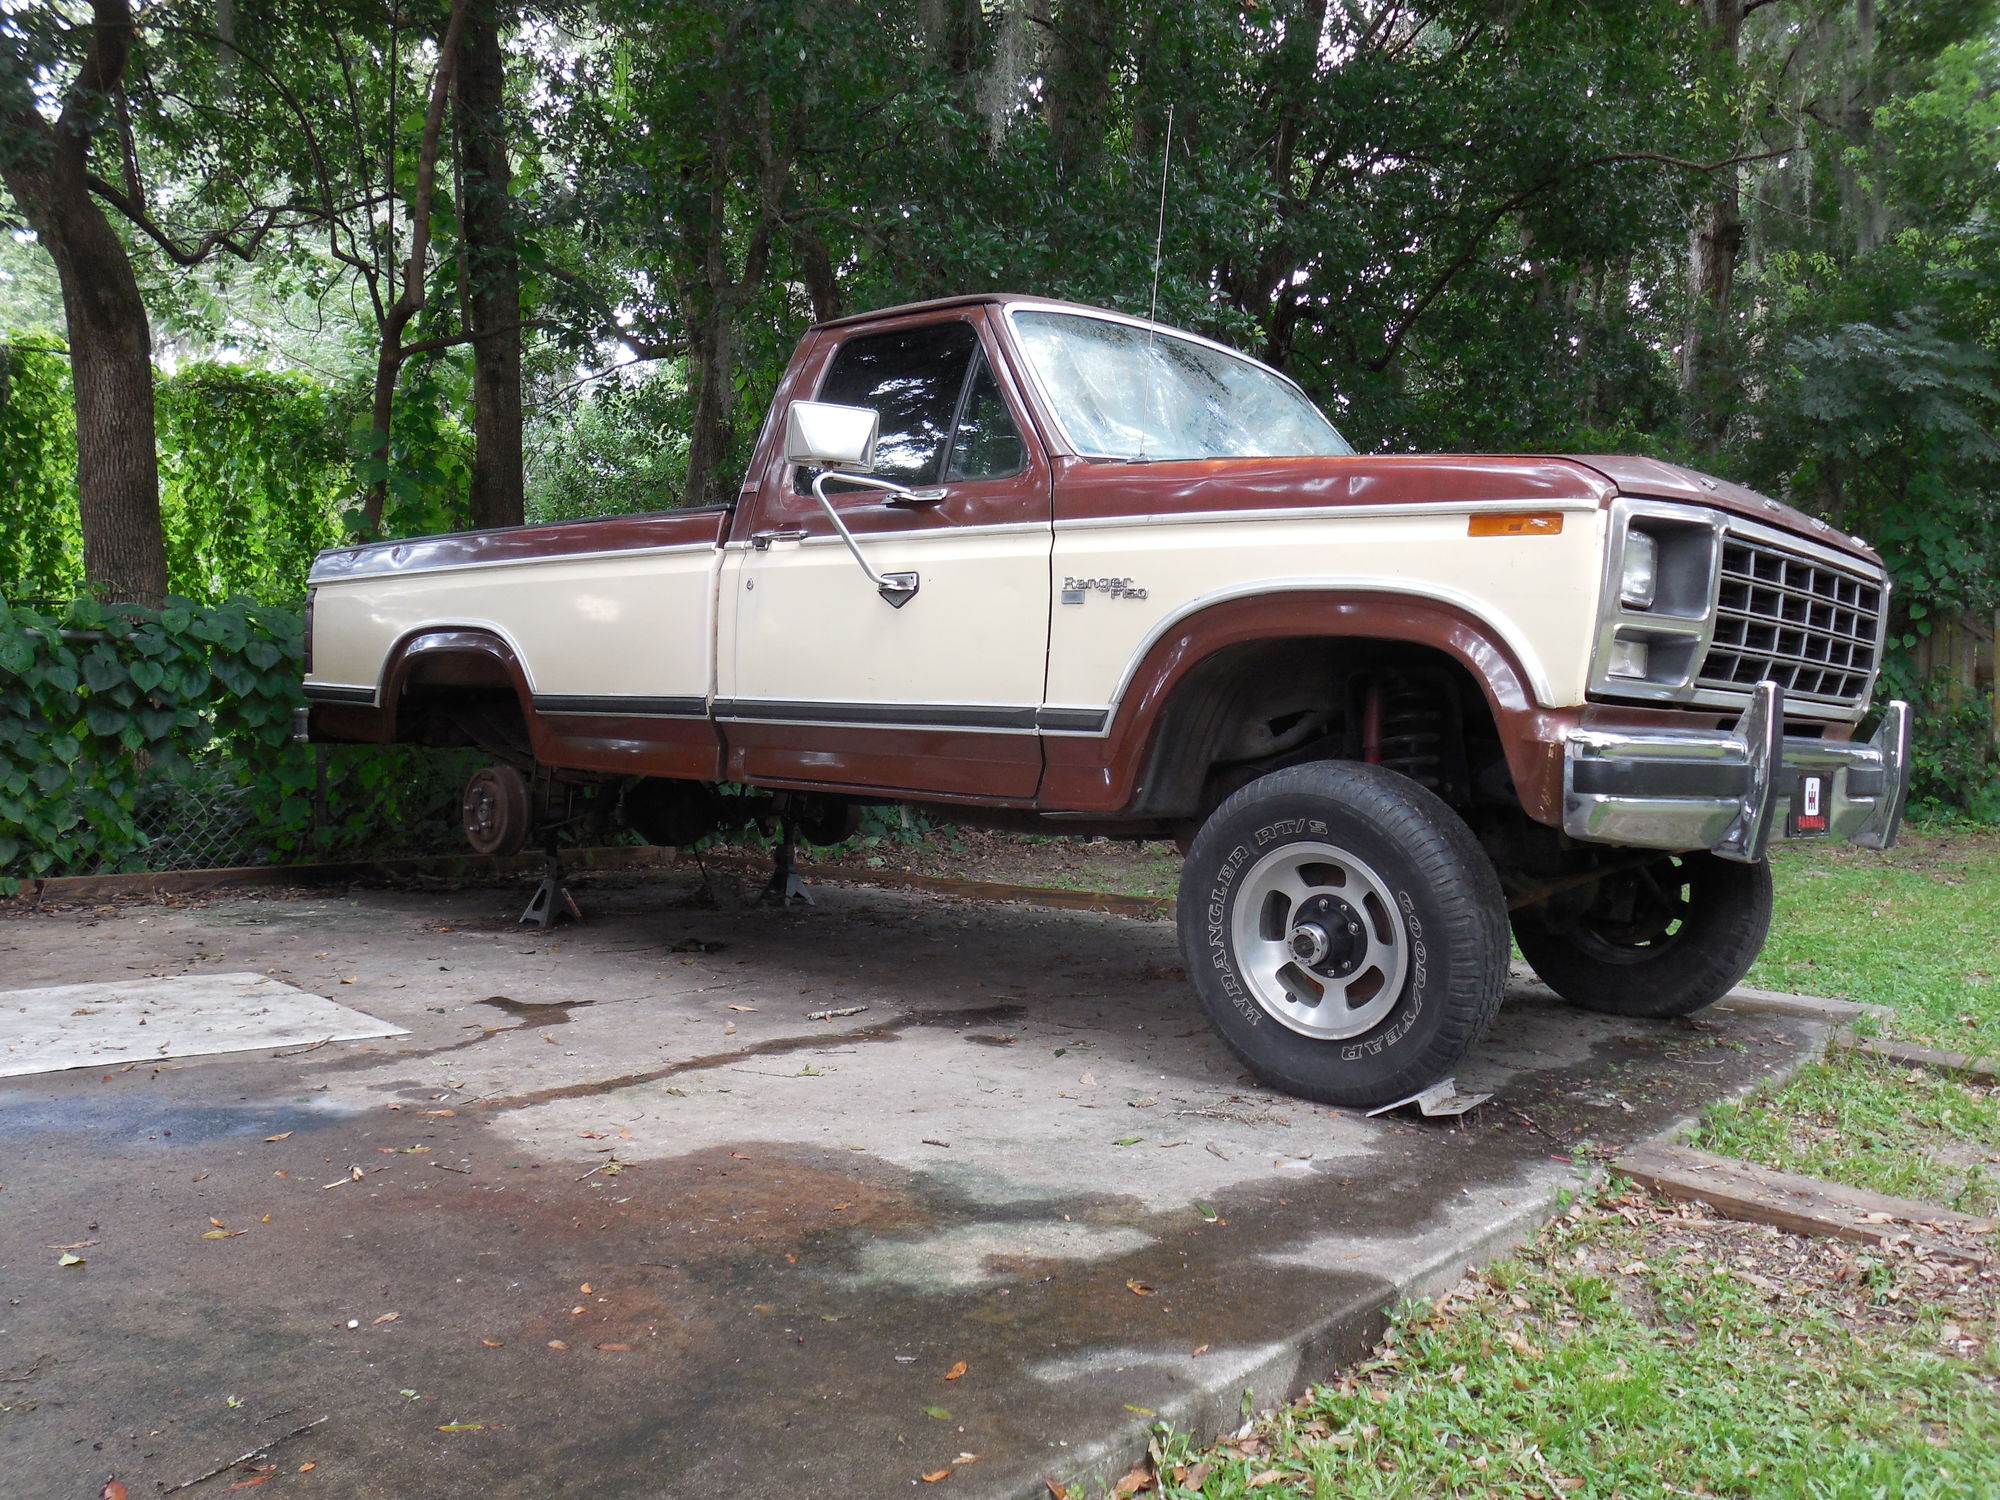 1980 Ford F150 Ranger Lariat Page 9 Truck Enthusiasts Forums.